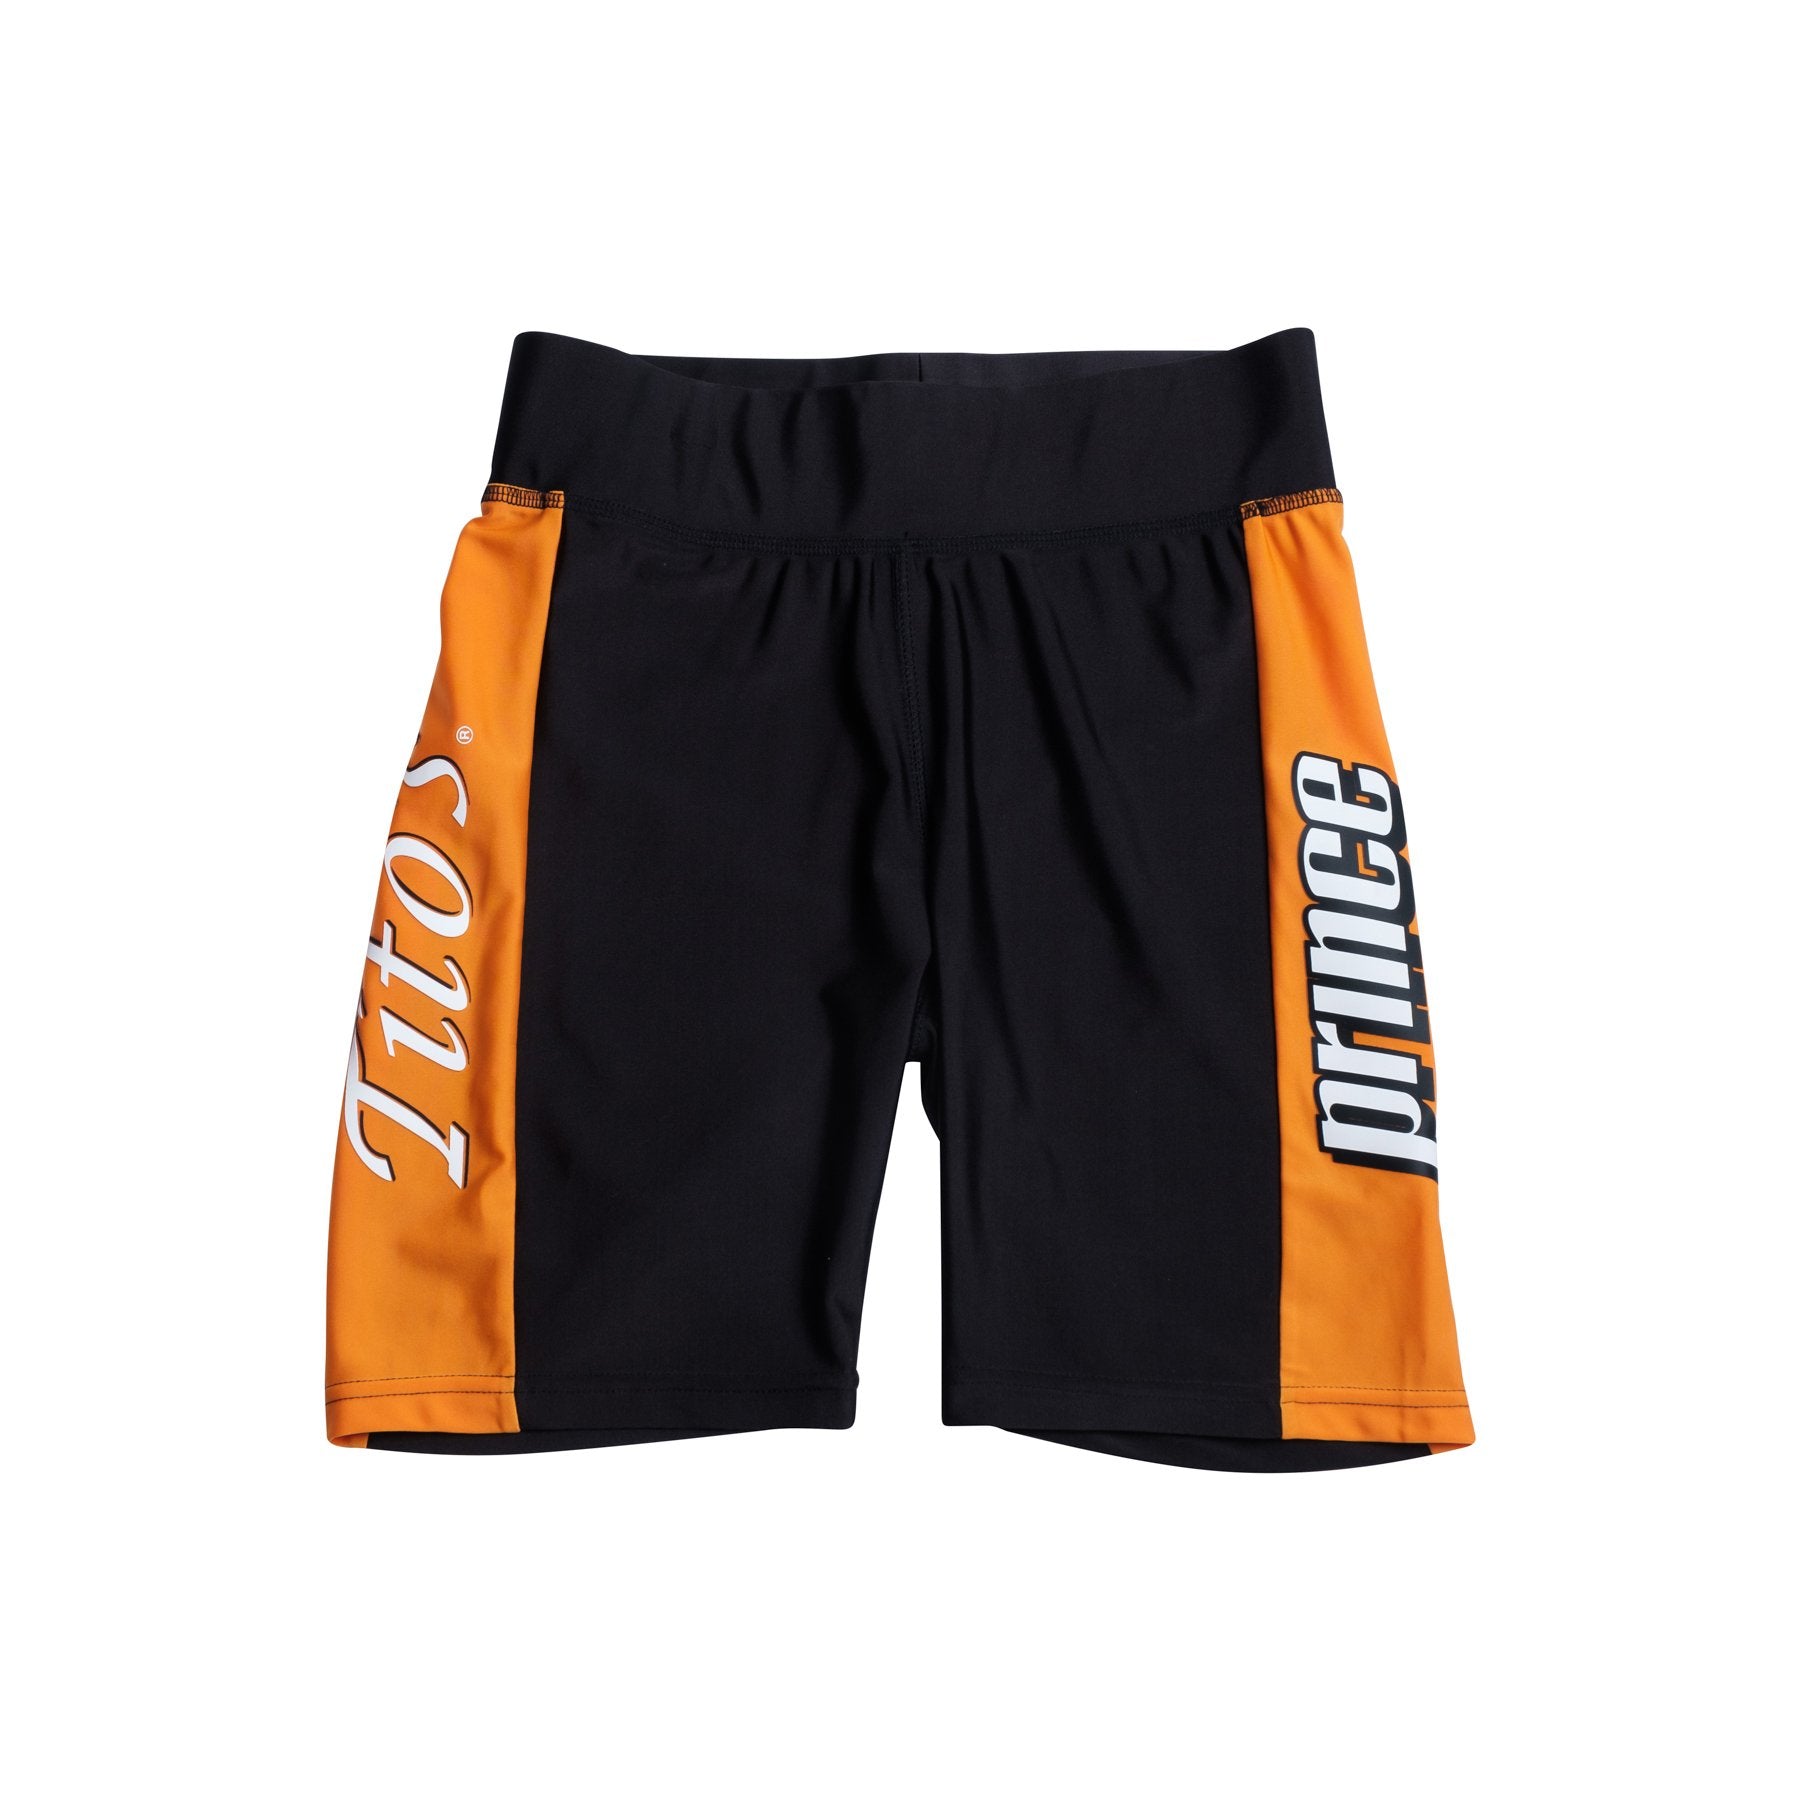 Front of black shorts with orange panels on both legs, Tito's on right leg, prince on left leg